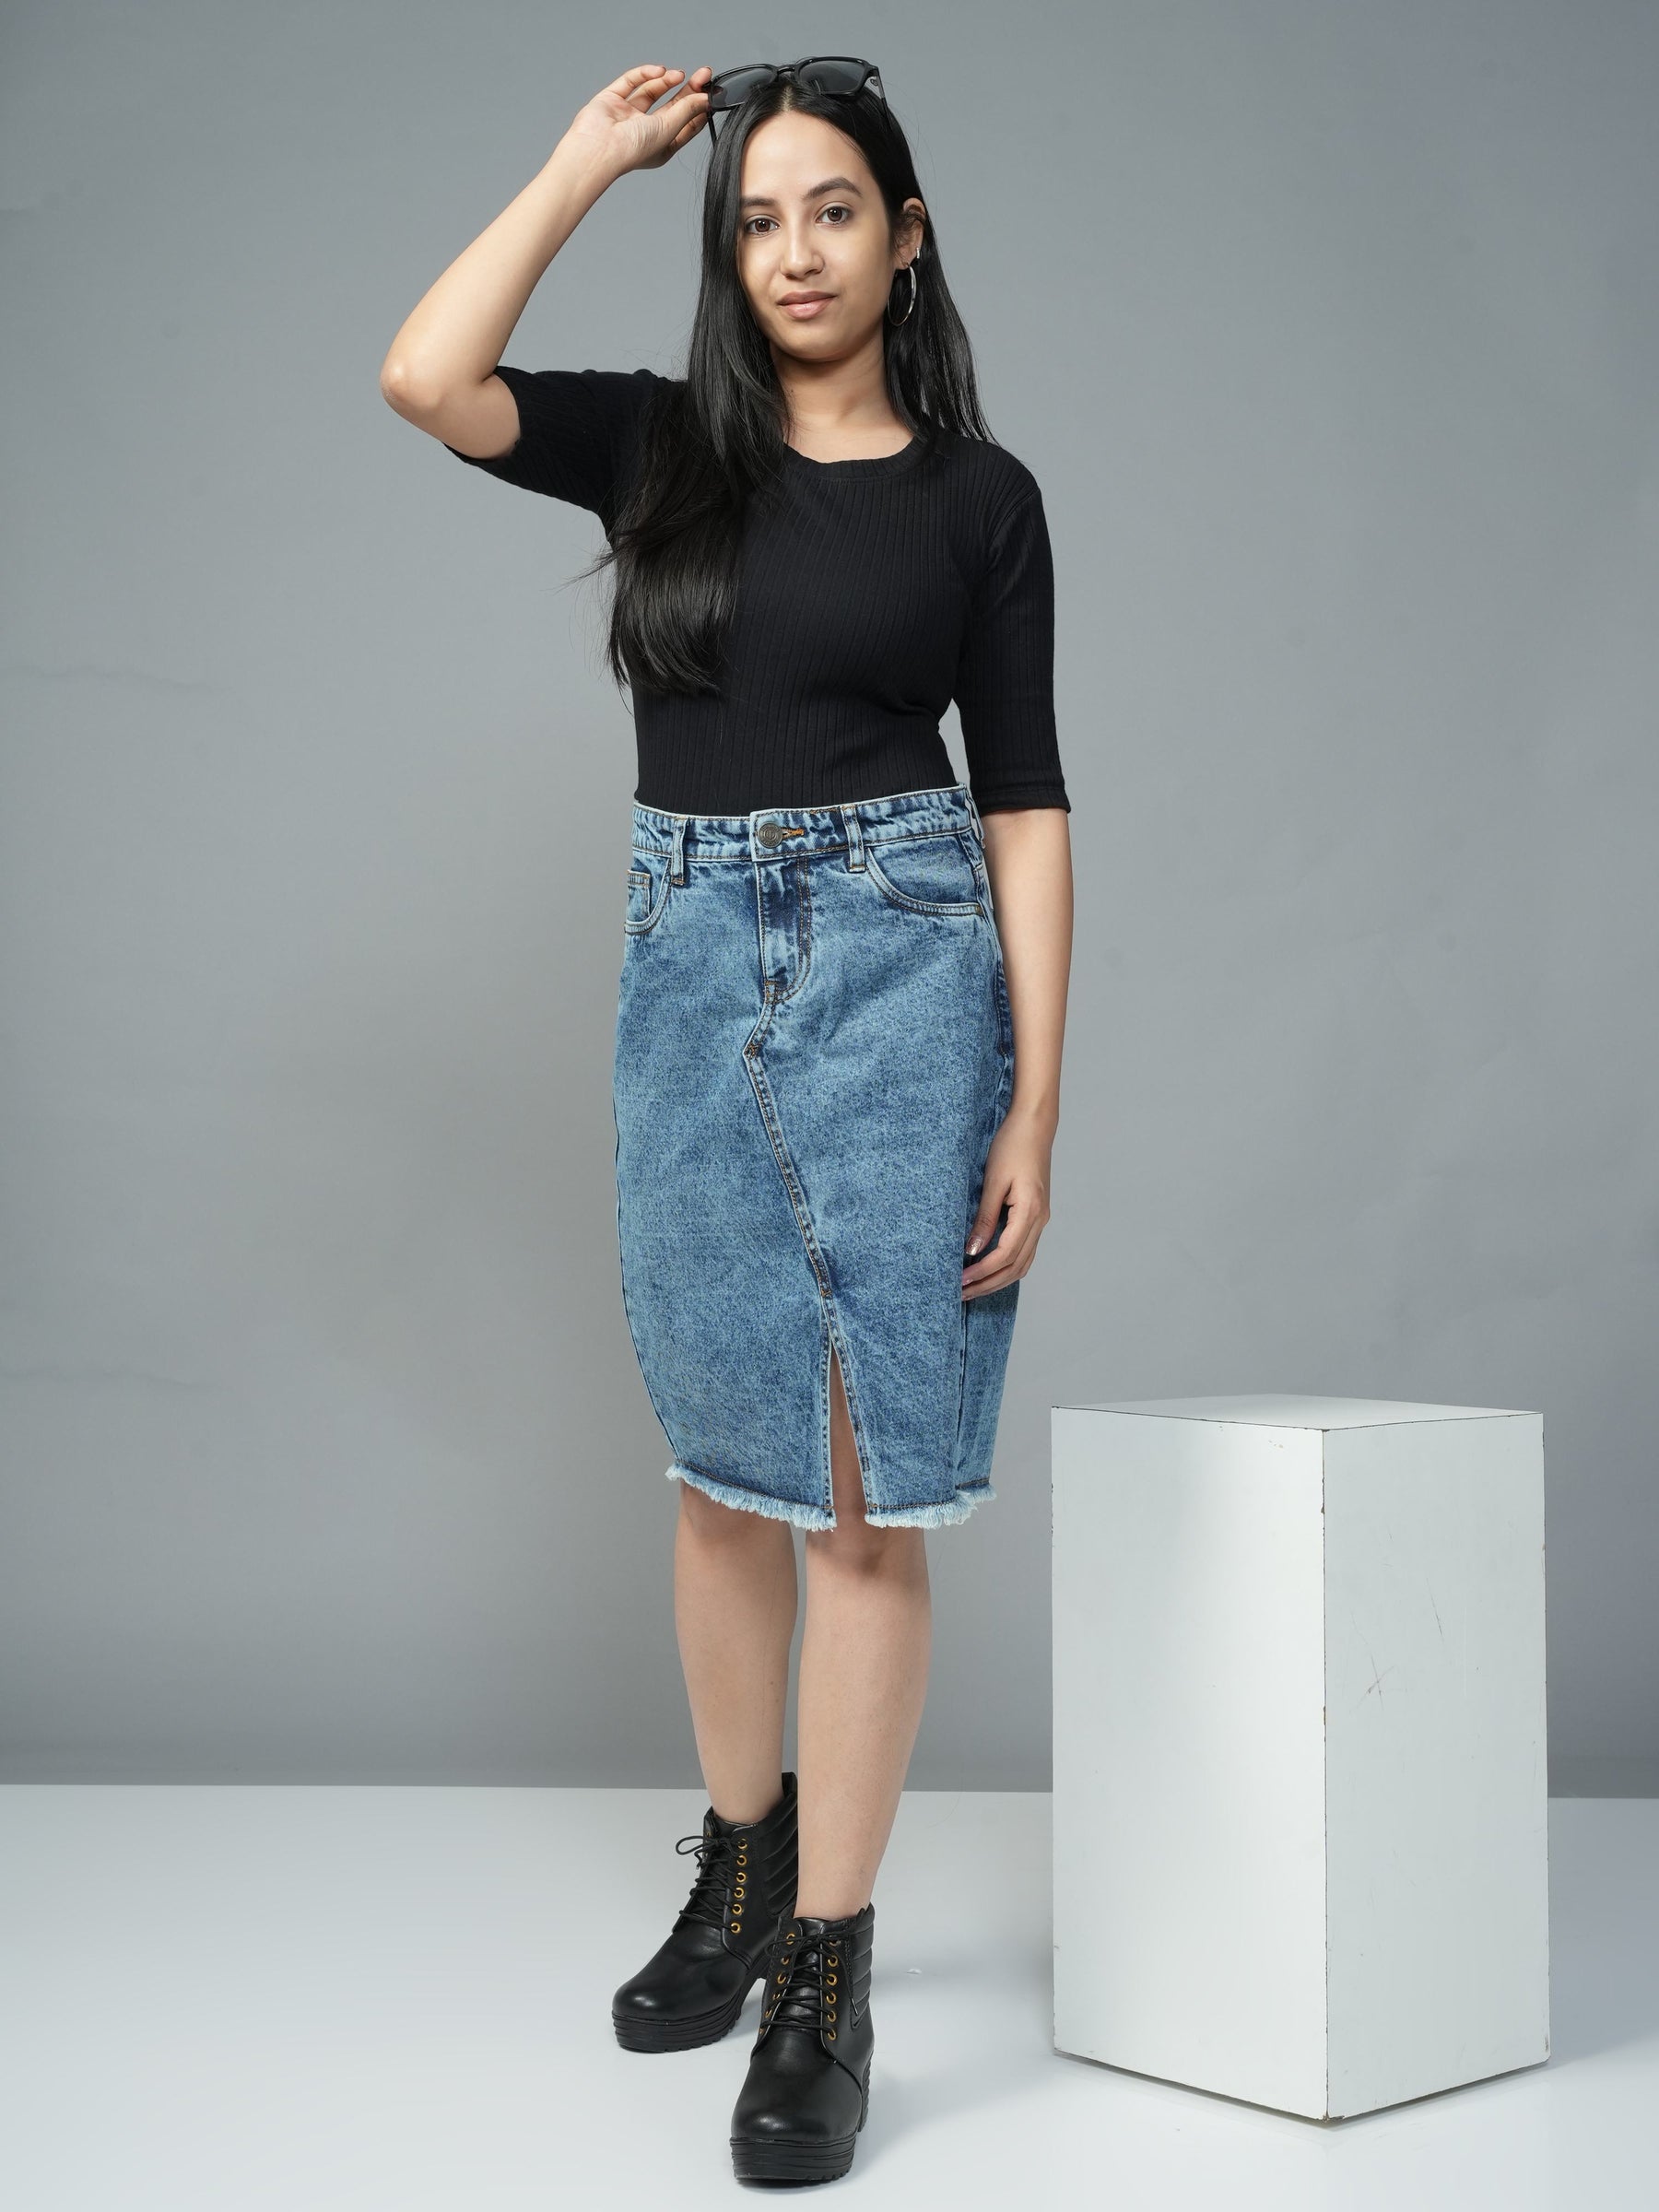 Share more than 126 denim top and skirt